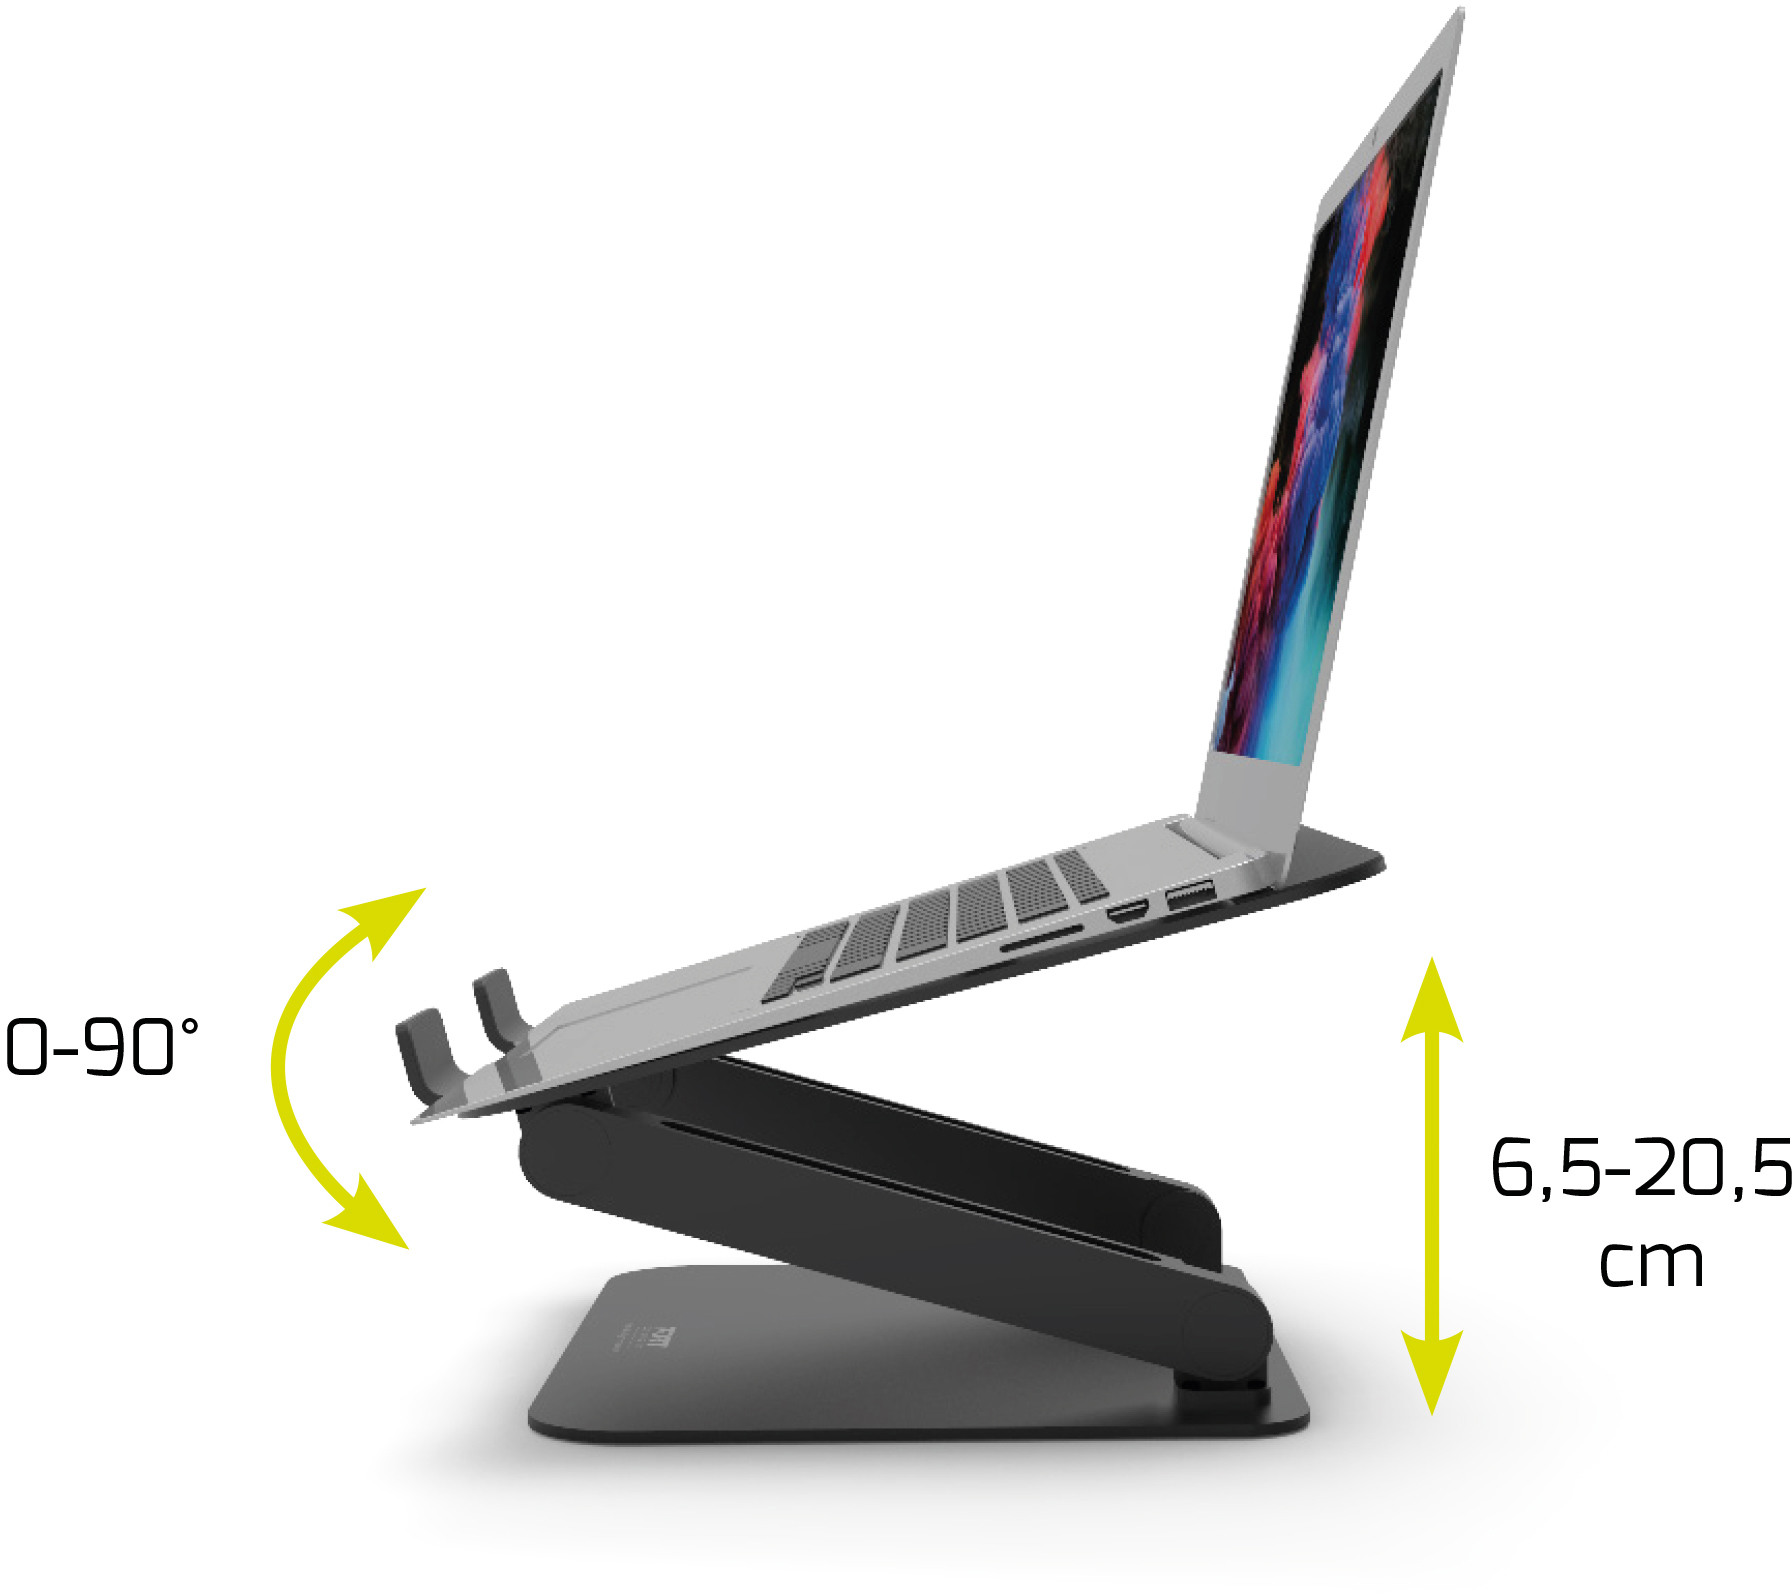 PORT Adjustable Notebook Stand 901108 for Notebooks up to 15.6